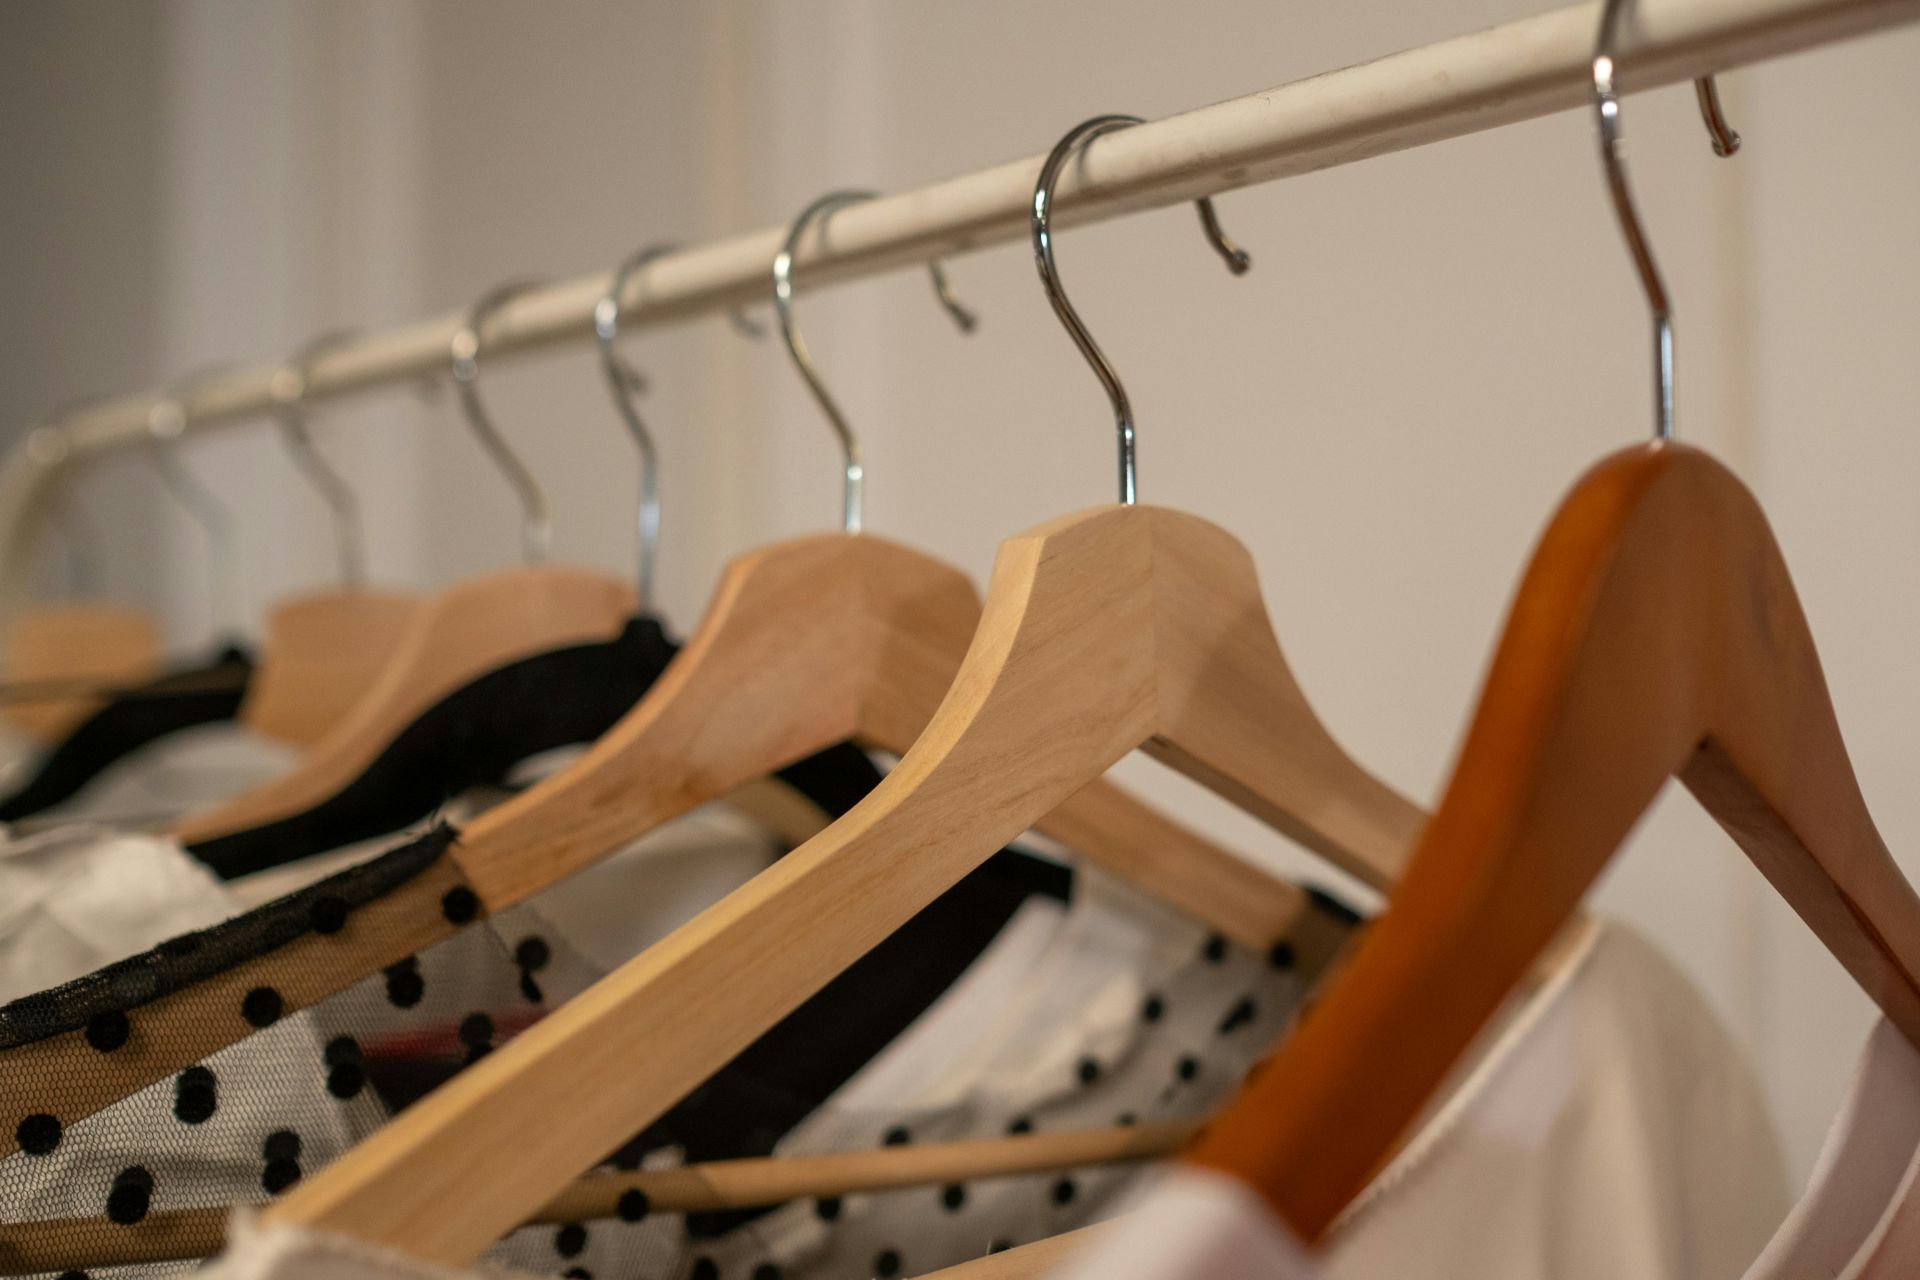 A close up on Hangers with Clothes